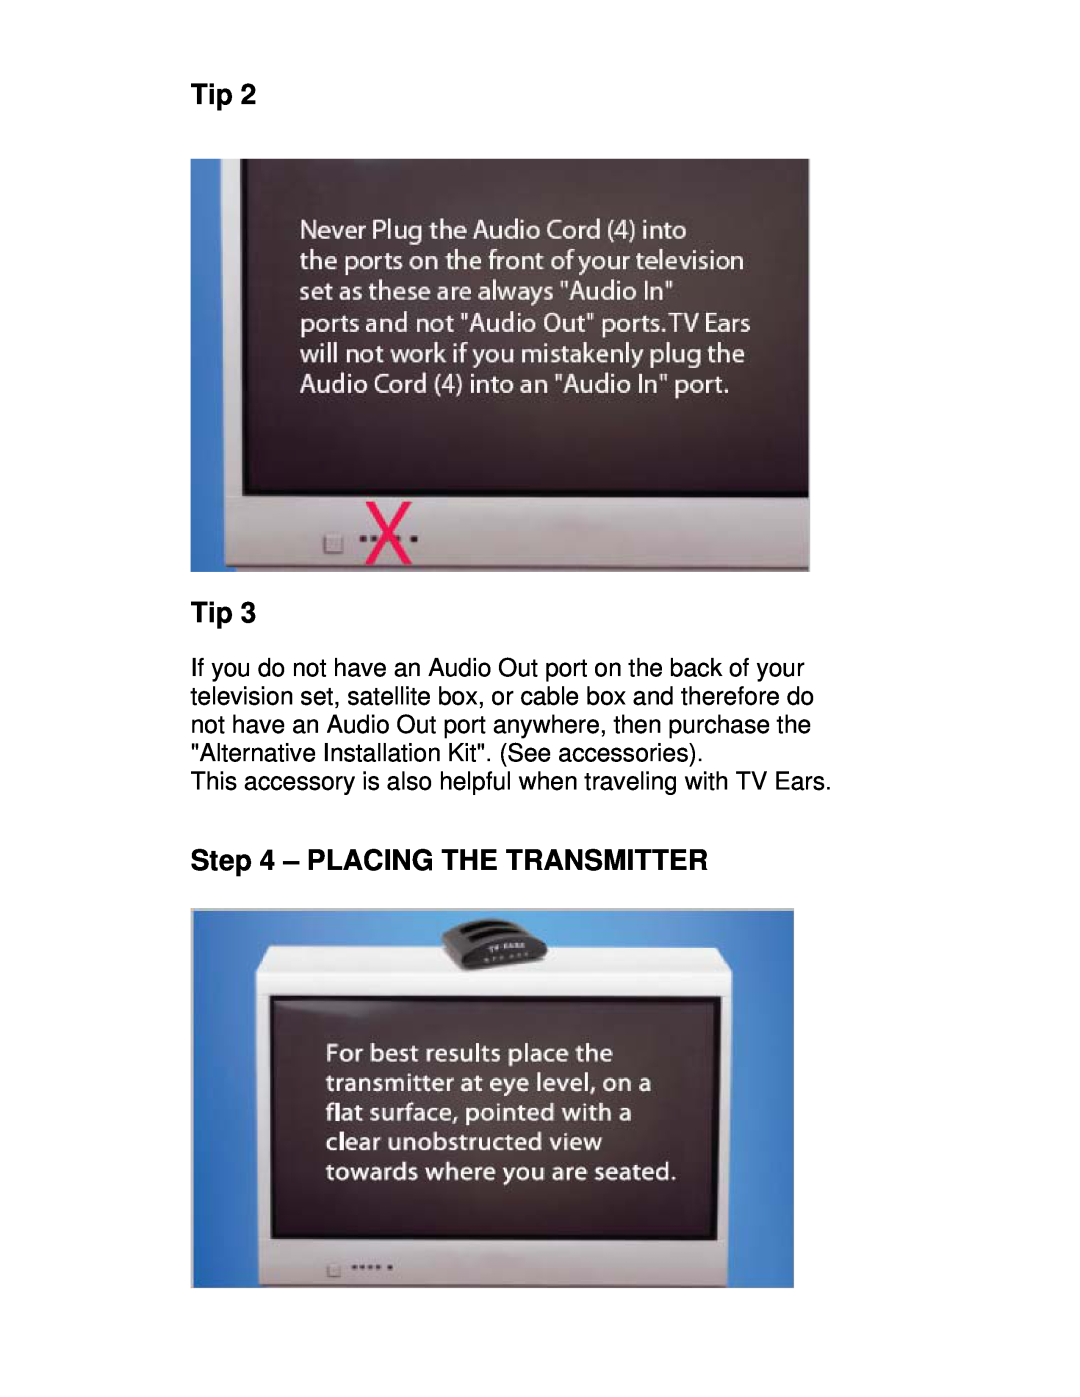 TV Ears Headset System installation instructions Tip Tip, Placing The Transmitter 